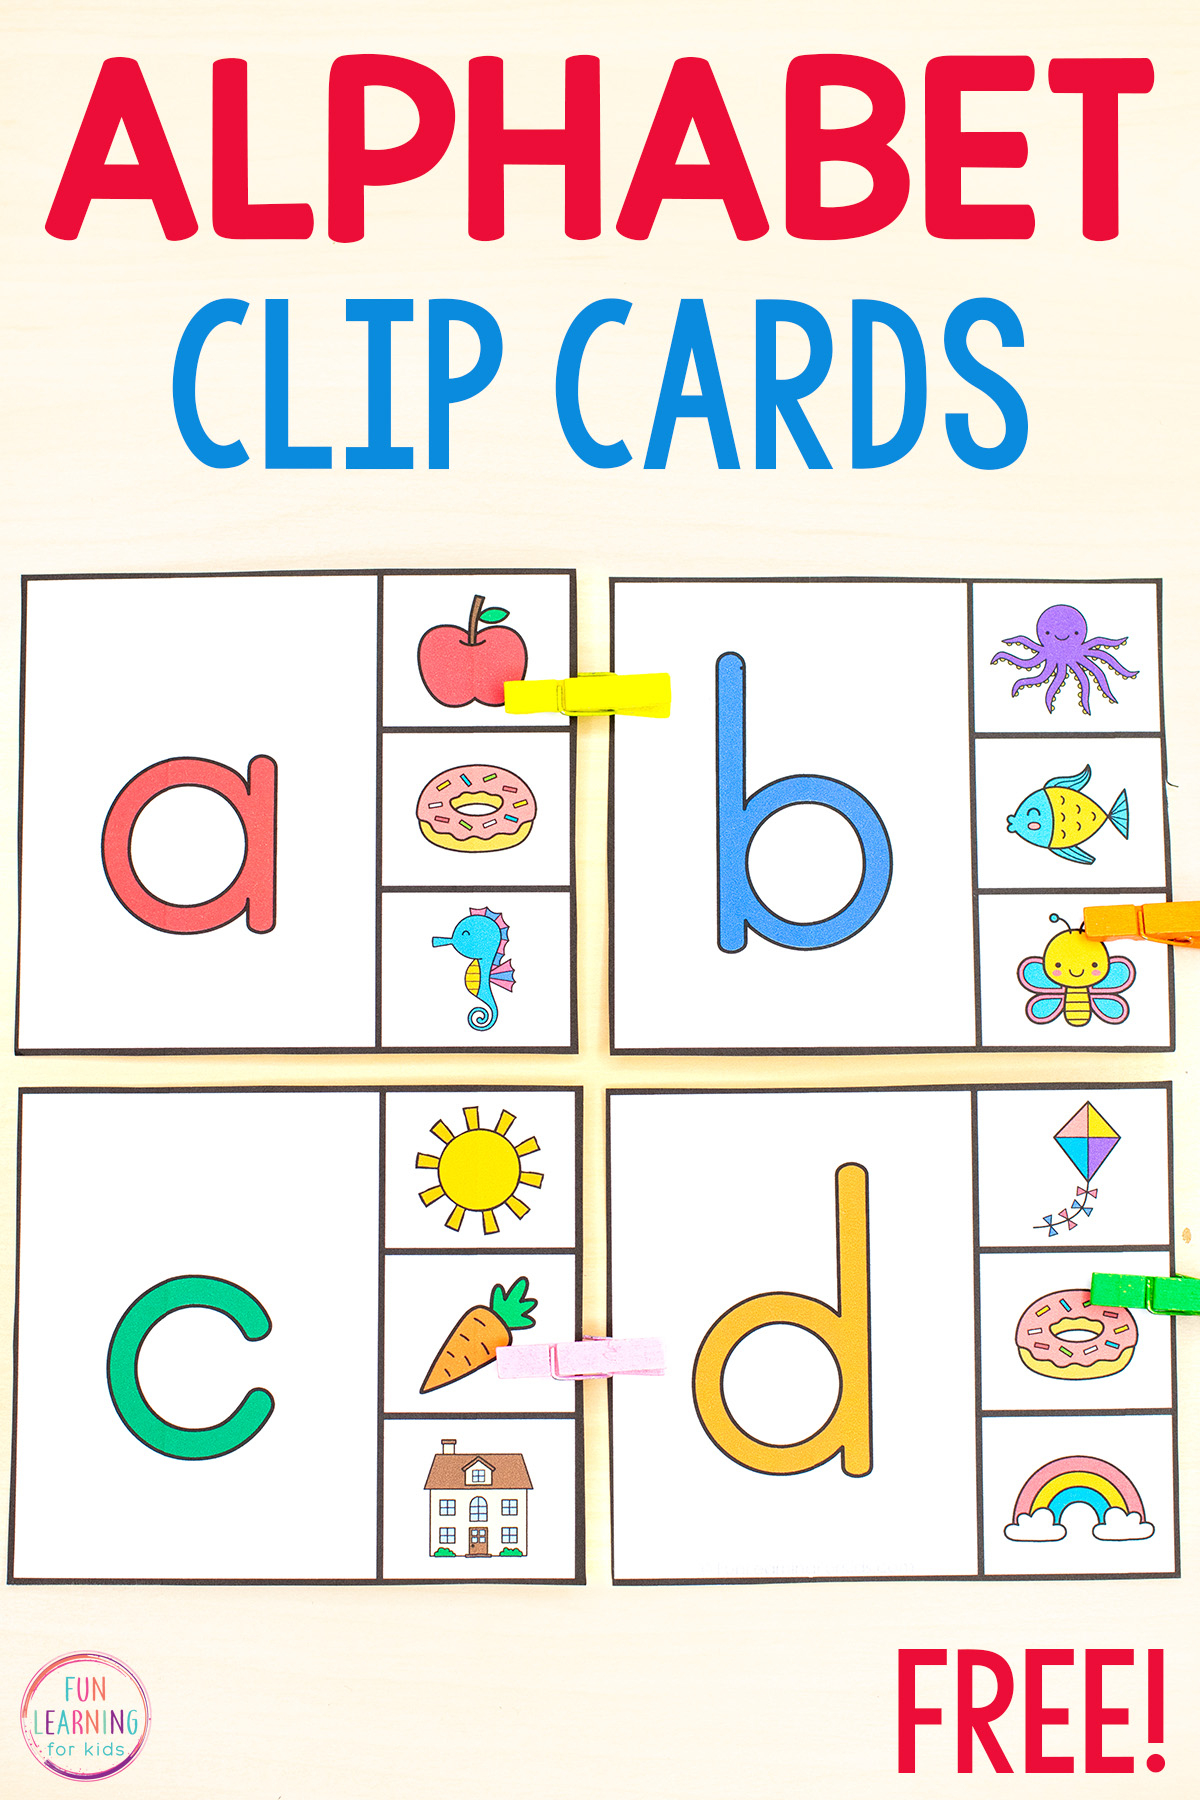 Beginning Sounds Matching Clip Cards Free Printable - Free Printable Clip Cards